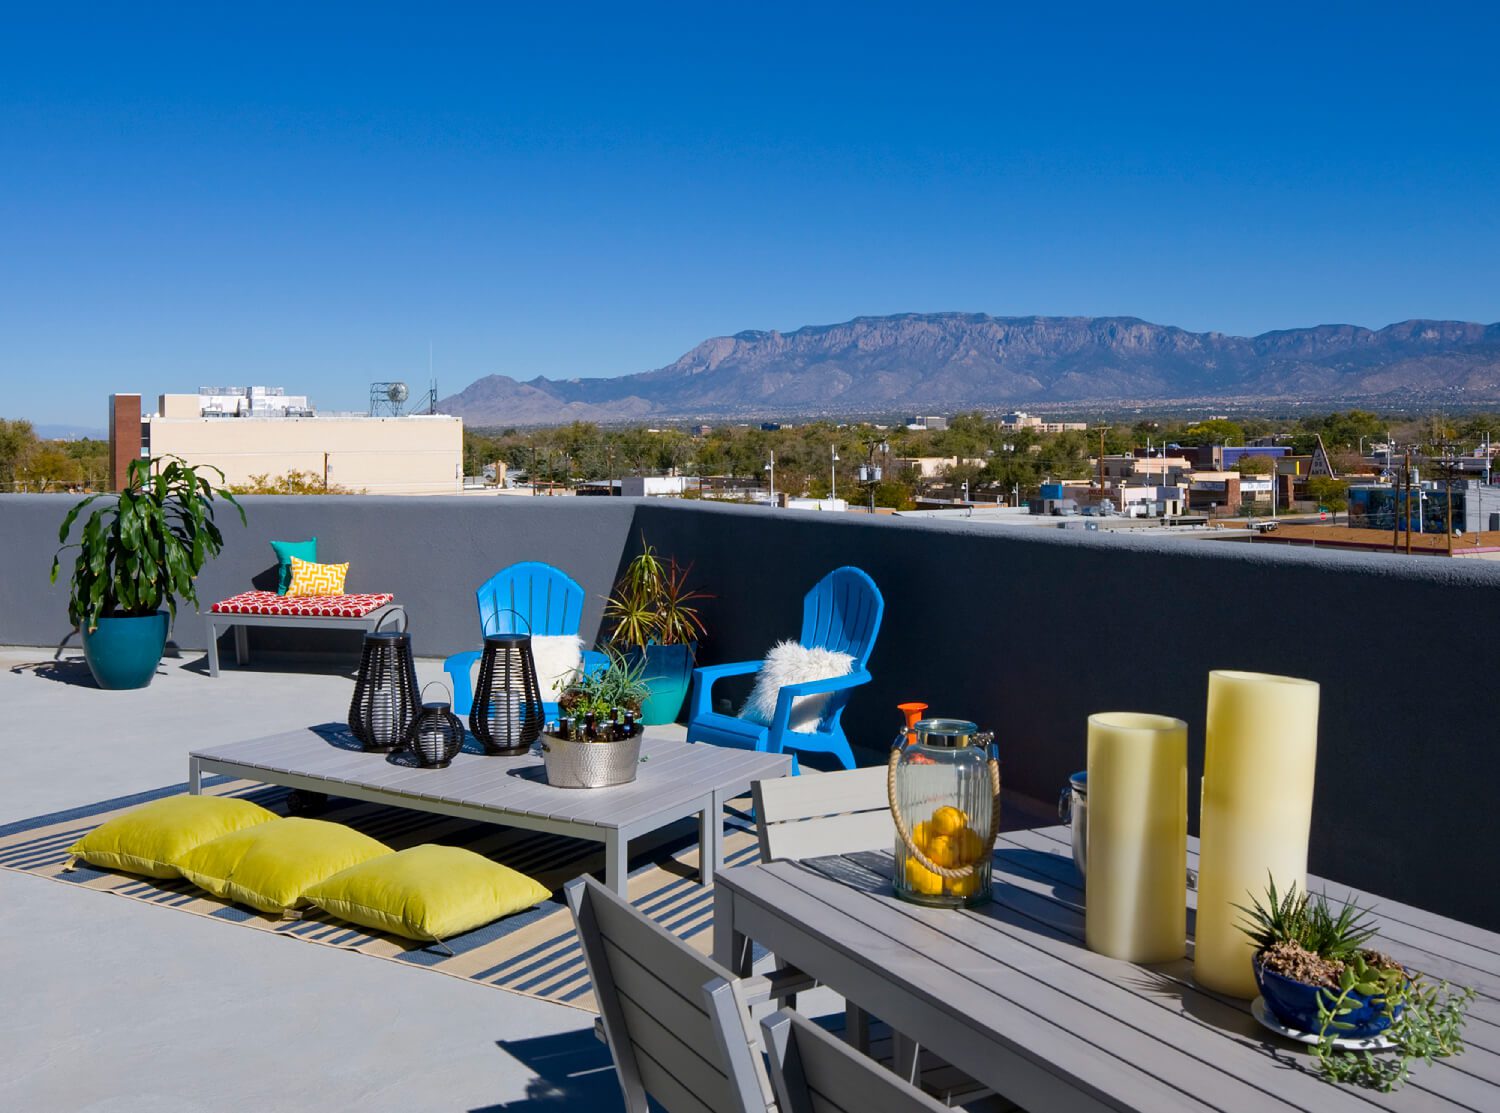 5 Ways to Relax at Our Luxury Apartments in Albuquerque